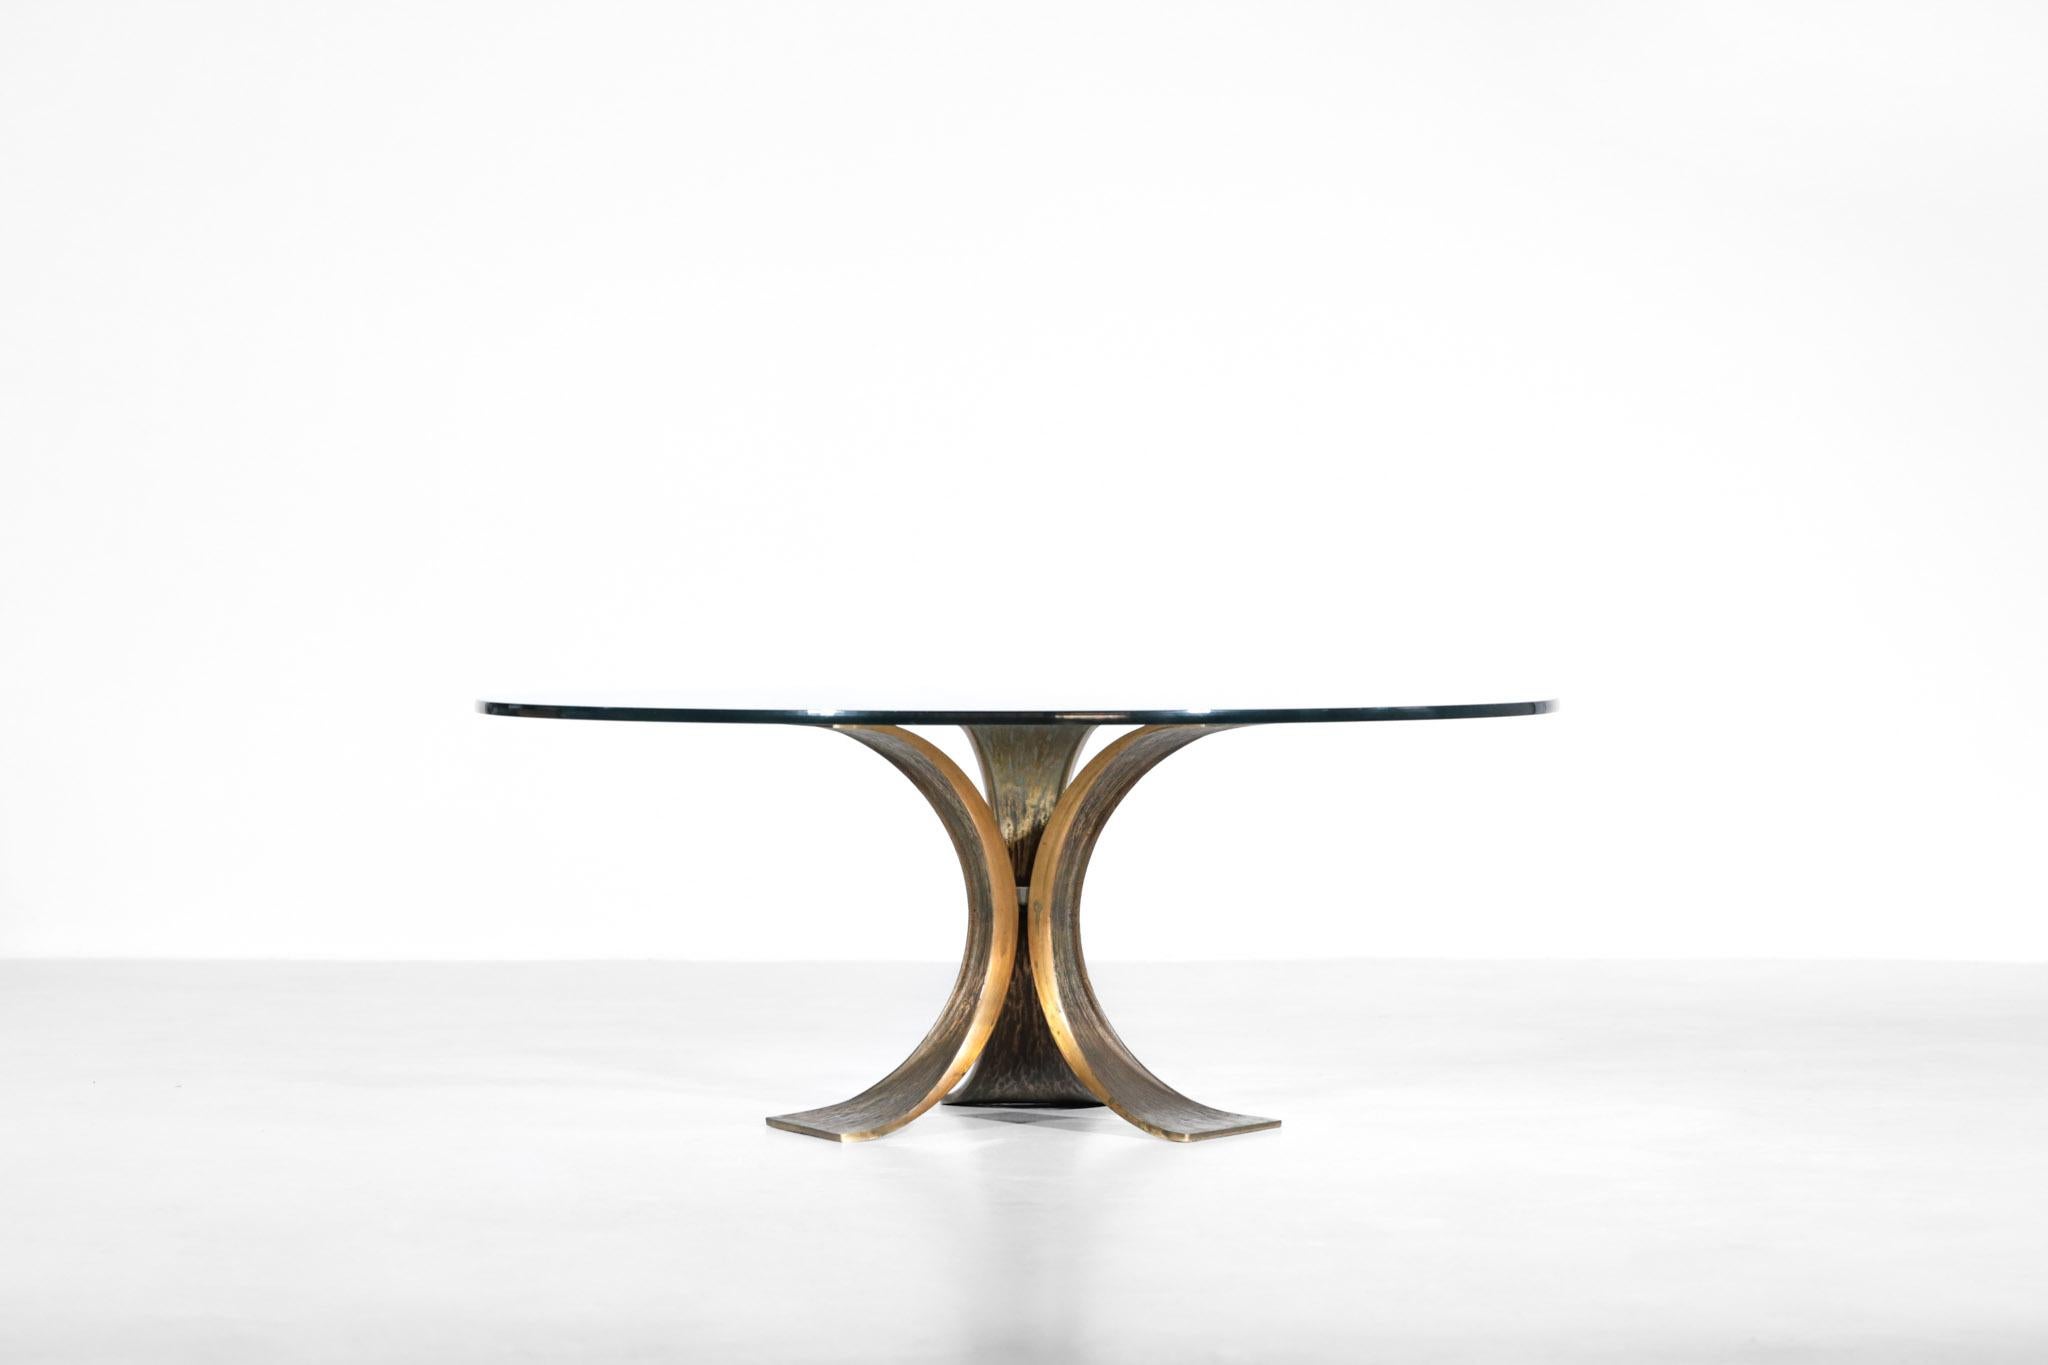 Large coffee table composed of bronze structure with round glass on the top. Really nice manufacture and design.